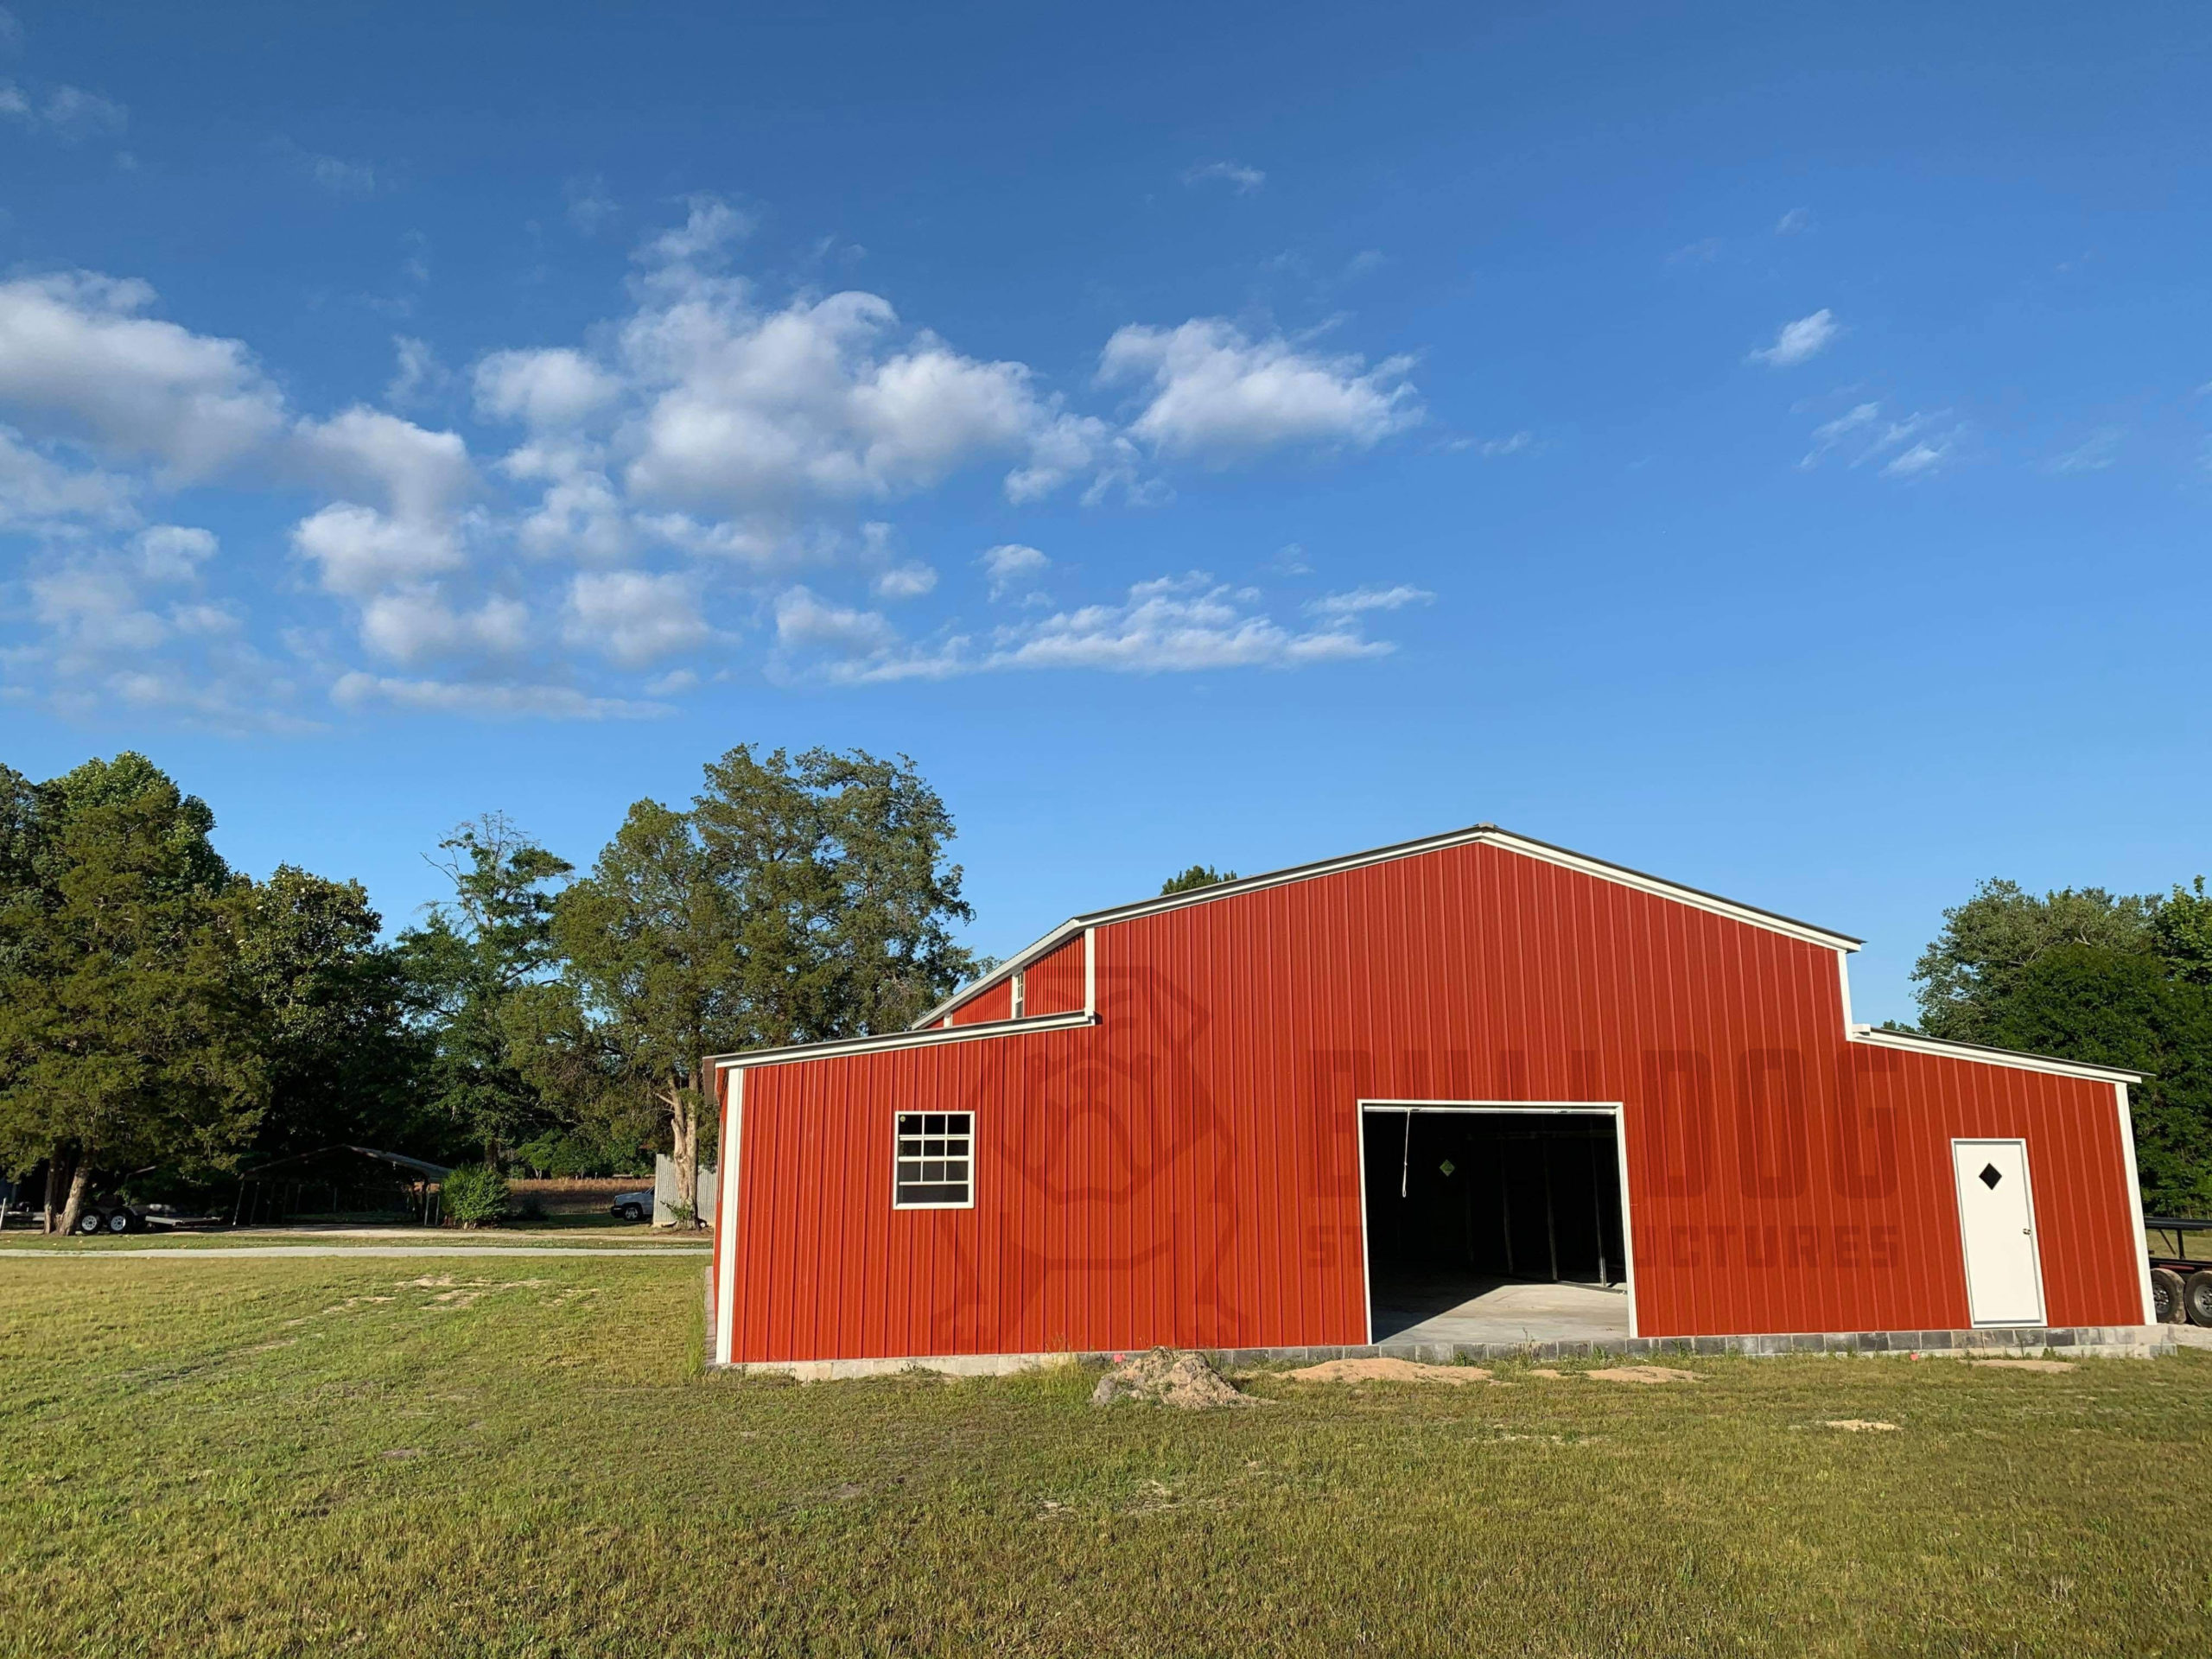 Exterior of red barn with large open door